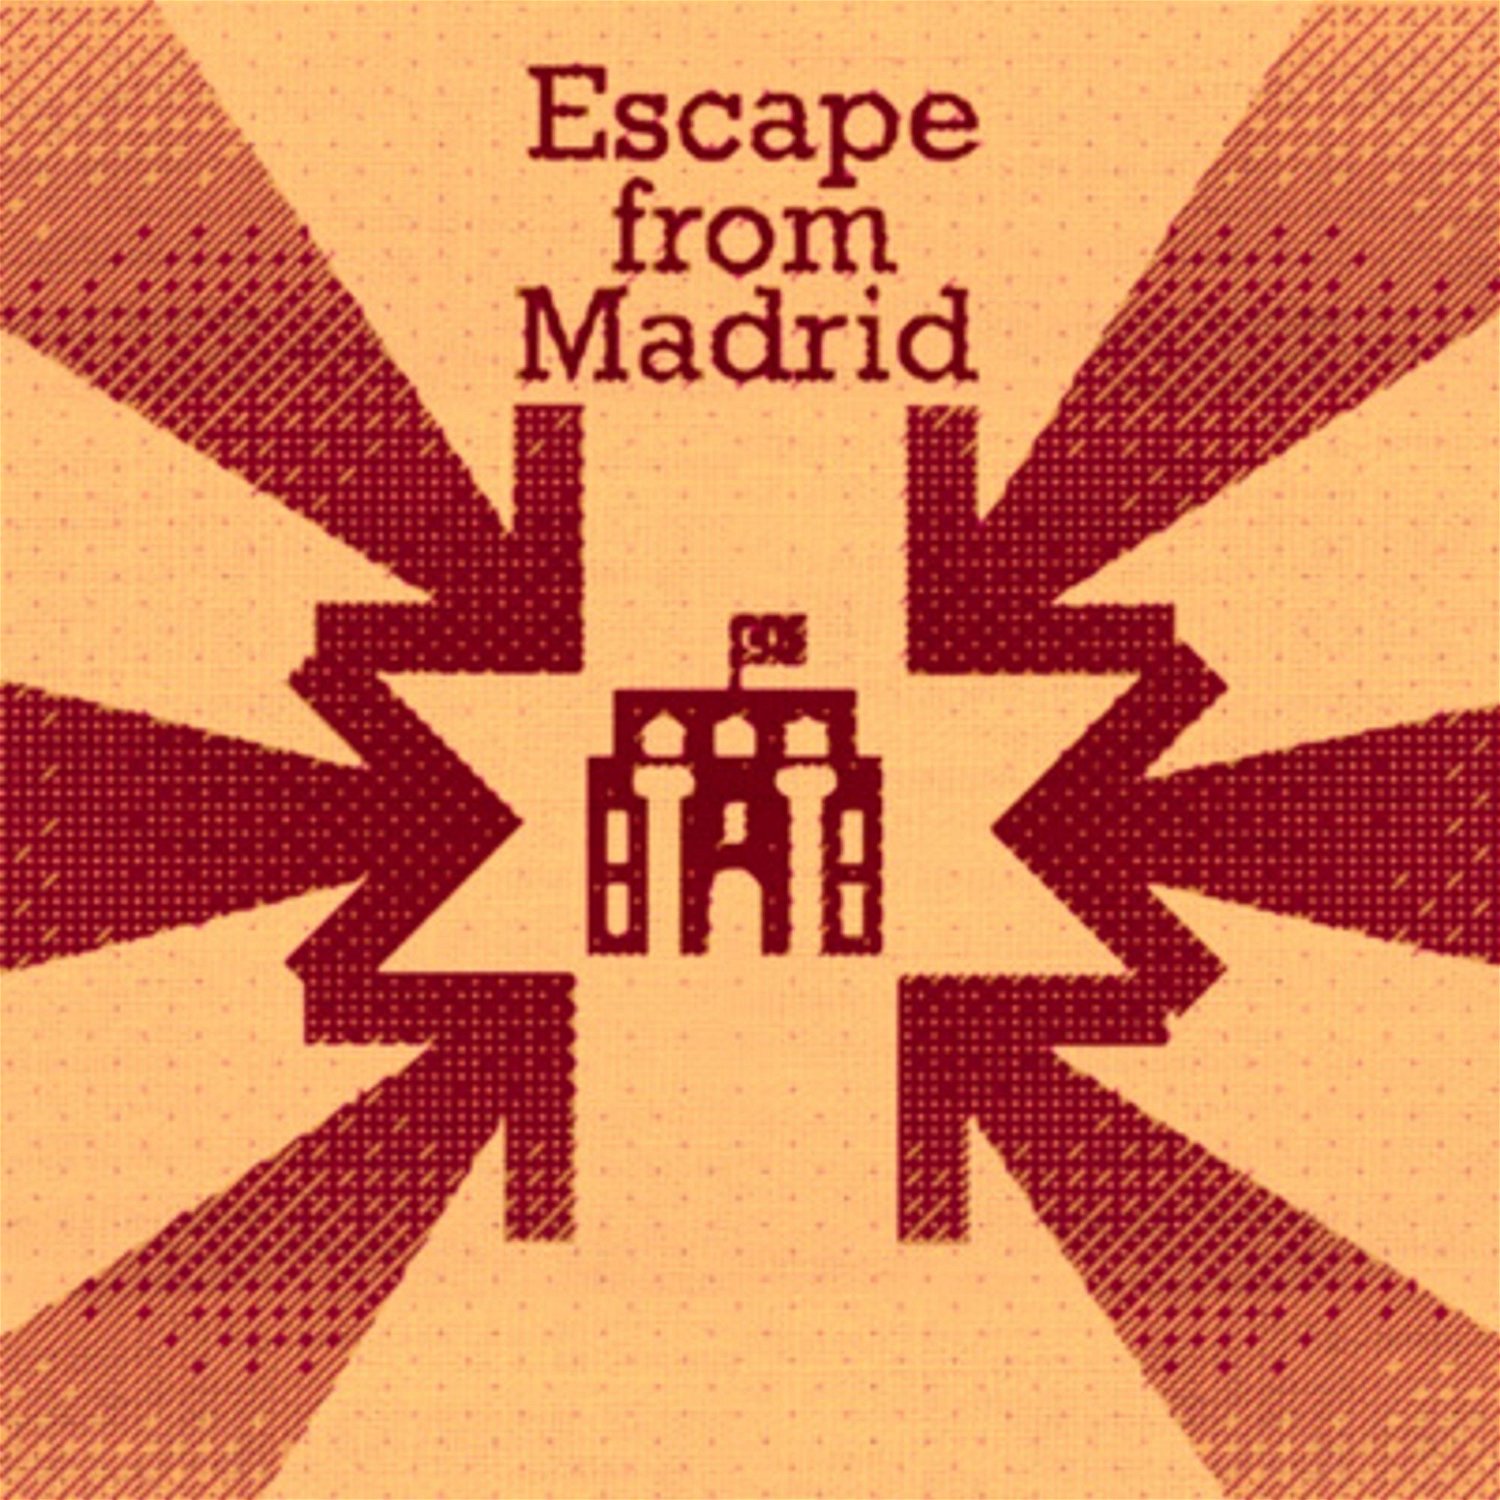 Escape from Madrid by Yarn | A Story Podcast